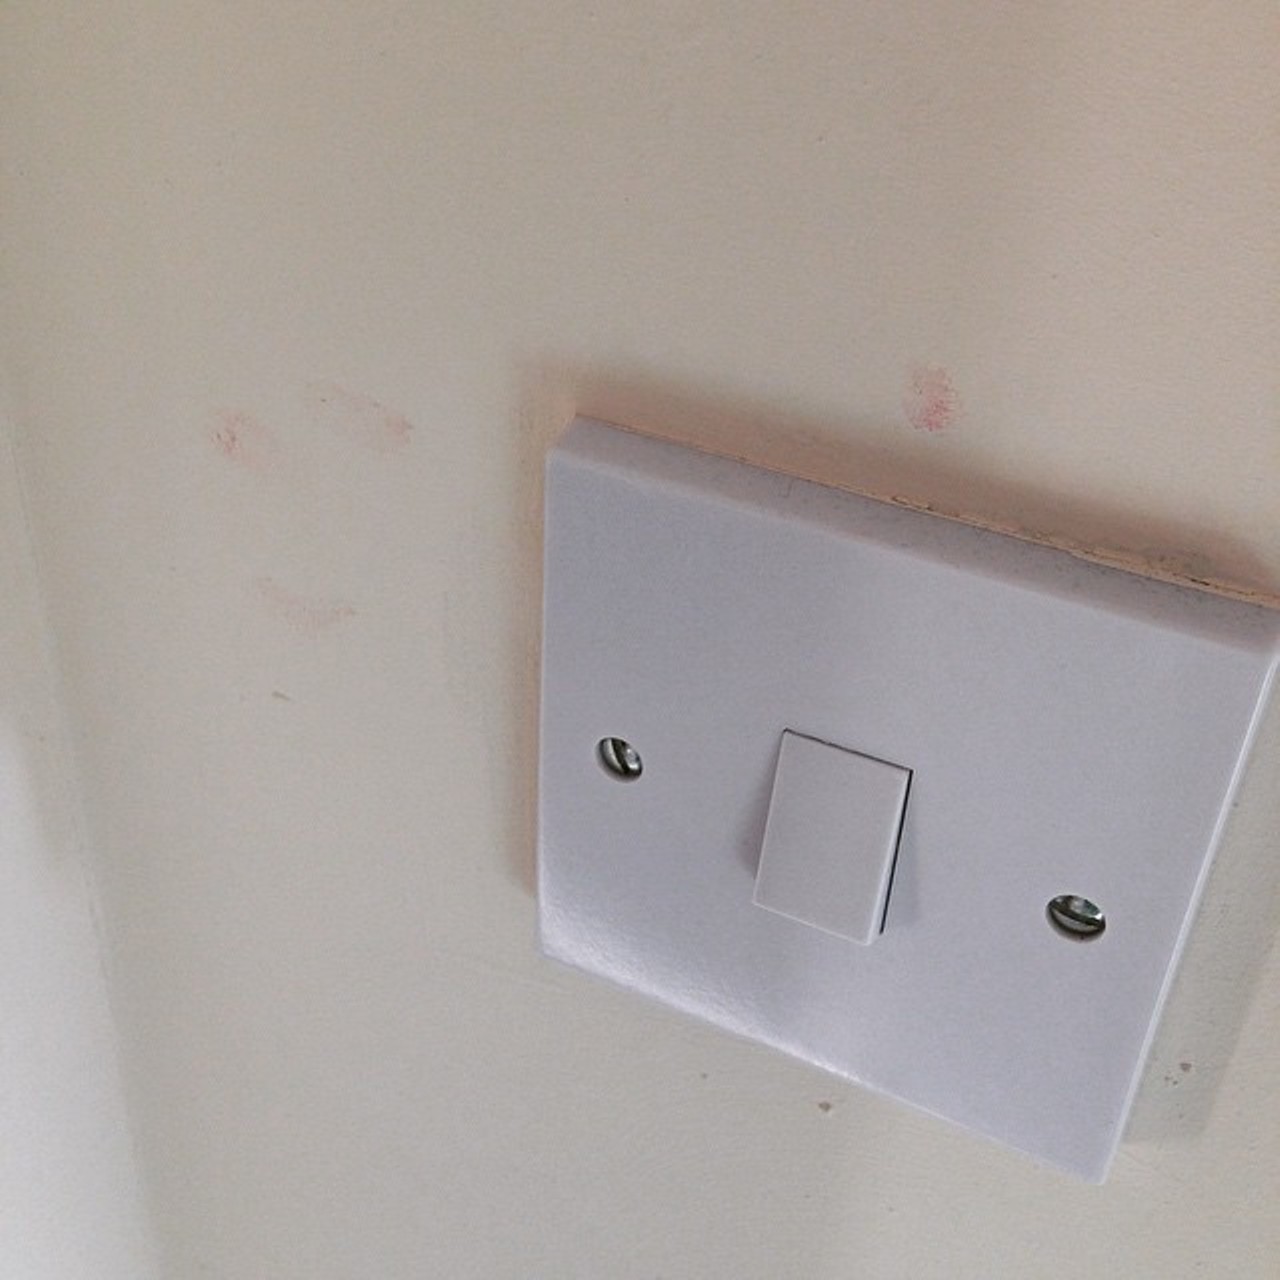 In fact, every light switch in your house is now covered in fake blood or makeup. 
Photo via kitch_xo on Instagram